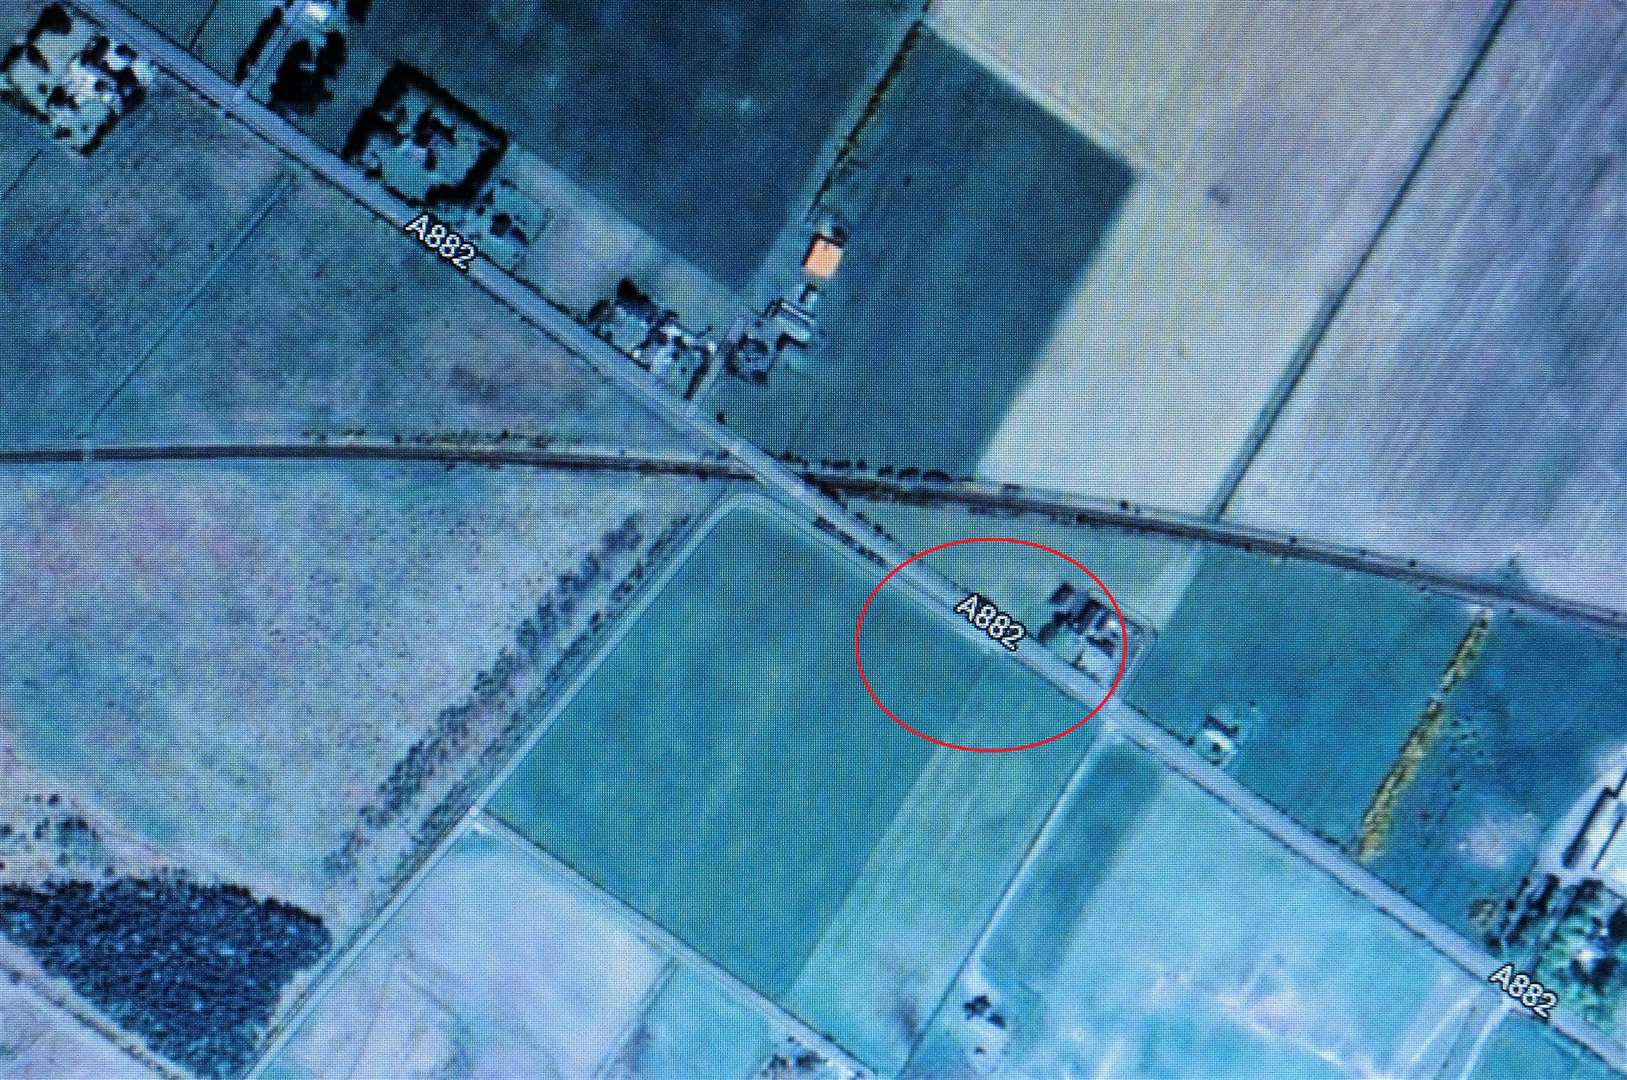 Google Map image showing the A882 and the approximate area where the pothole incident occurred. The curving line shows the rail route and where it crosses the road is a humpback bridge.